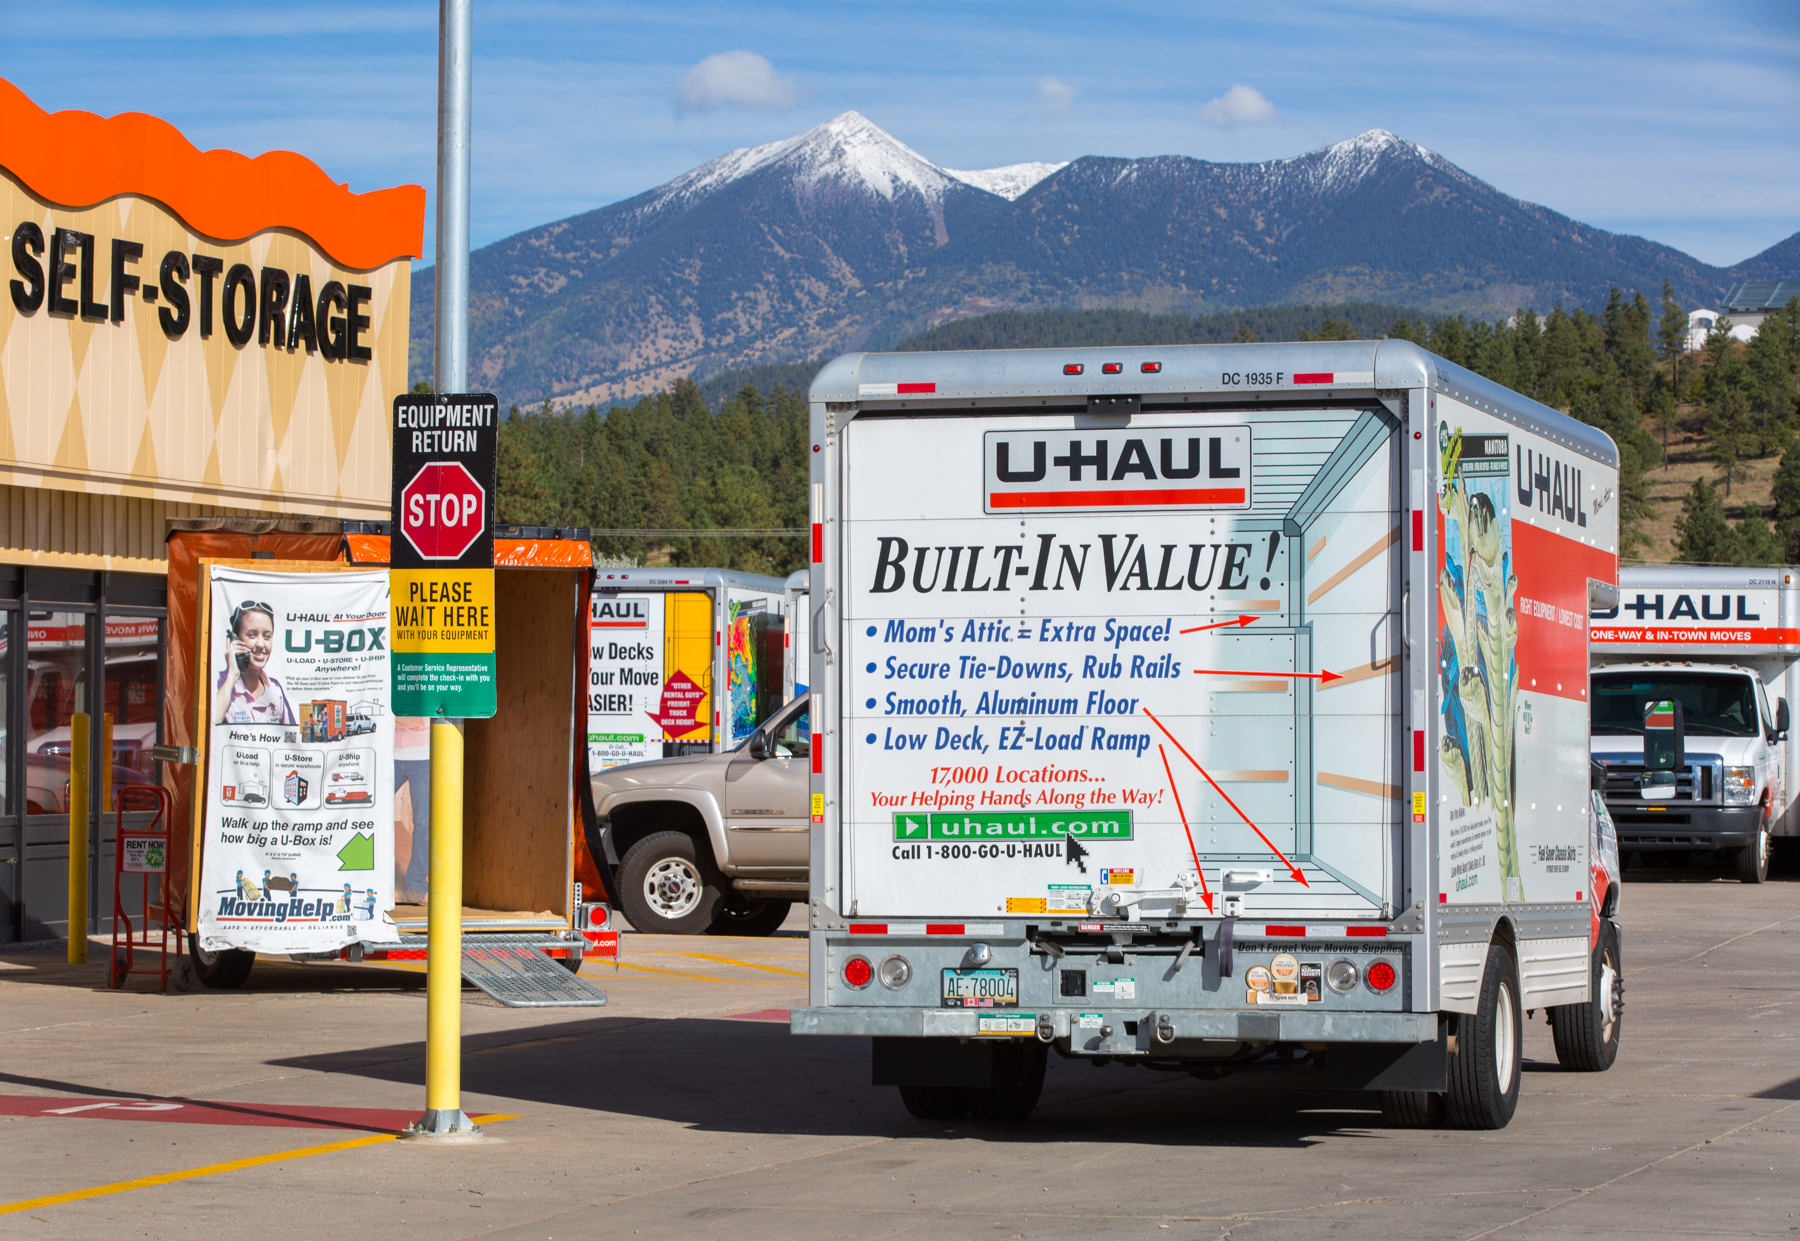 UTAH is U-Haul No. 8 Growth State for 2019